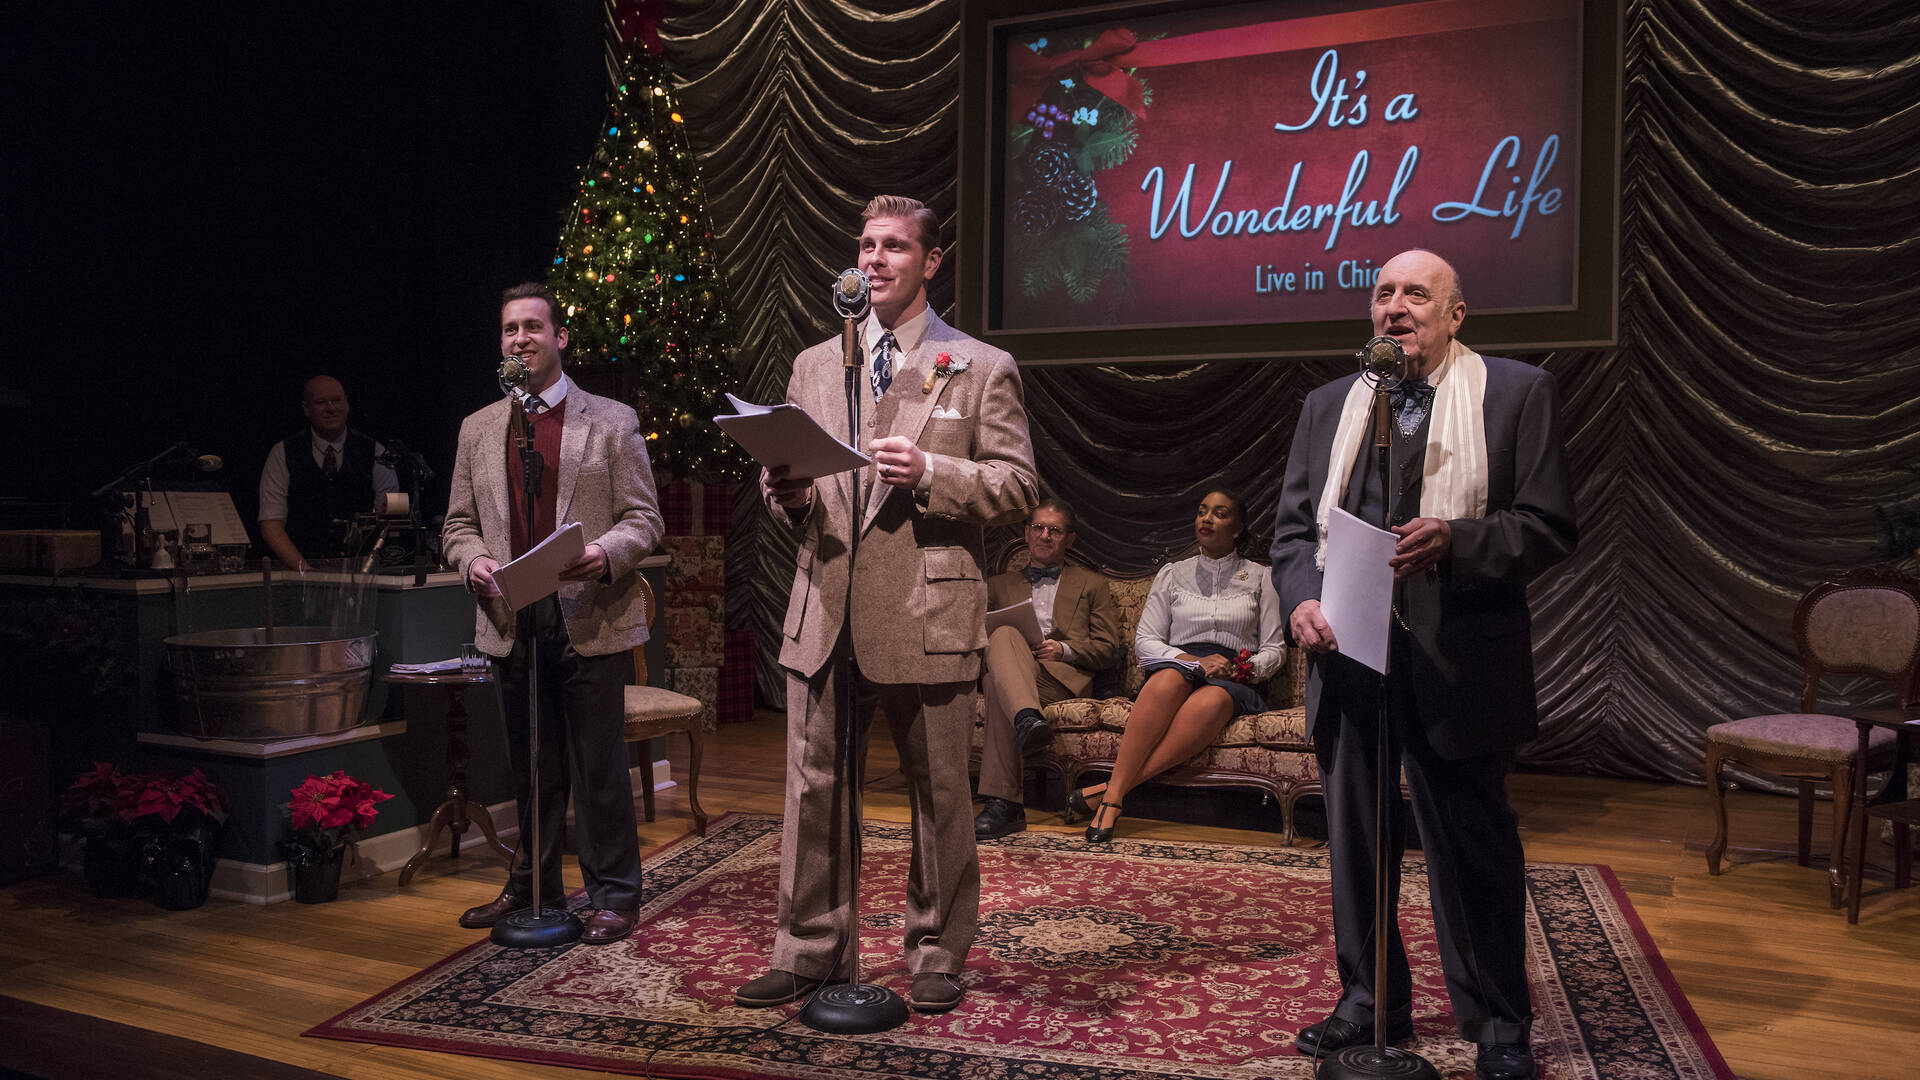 “It’s a Wonderful Life Live in Chicago!” Theater in Chicago